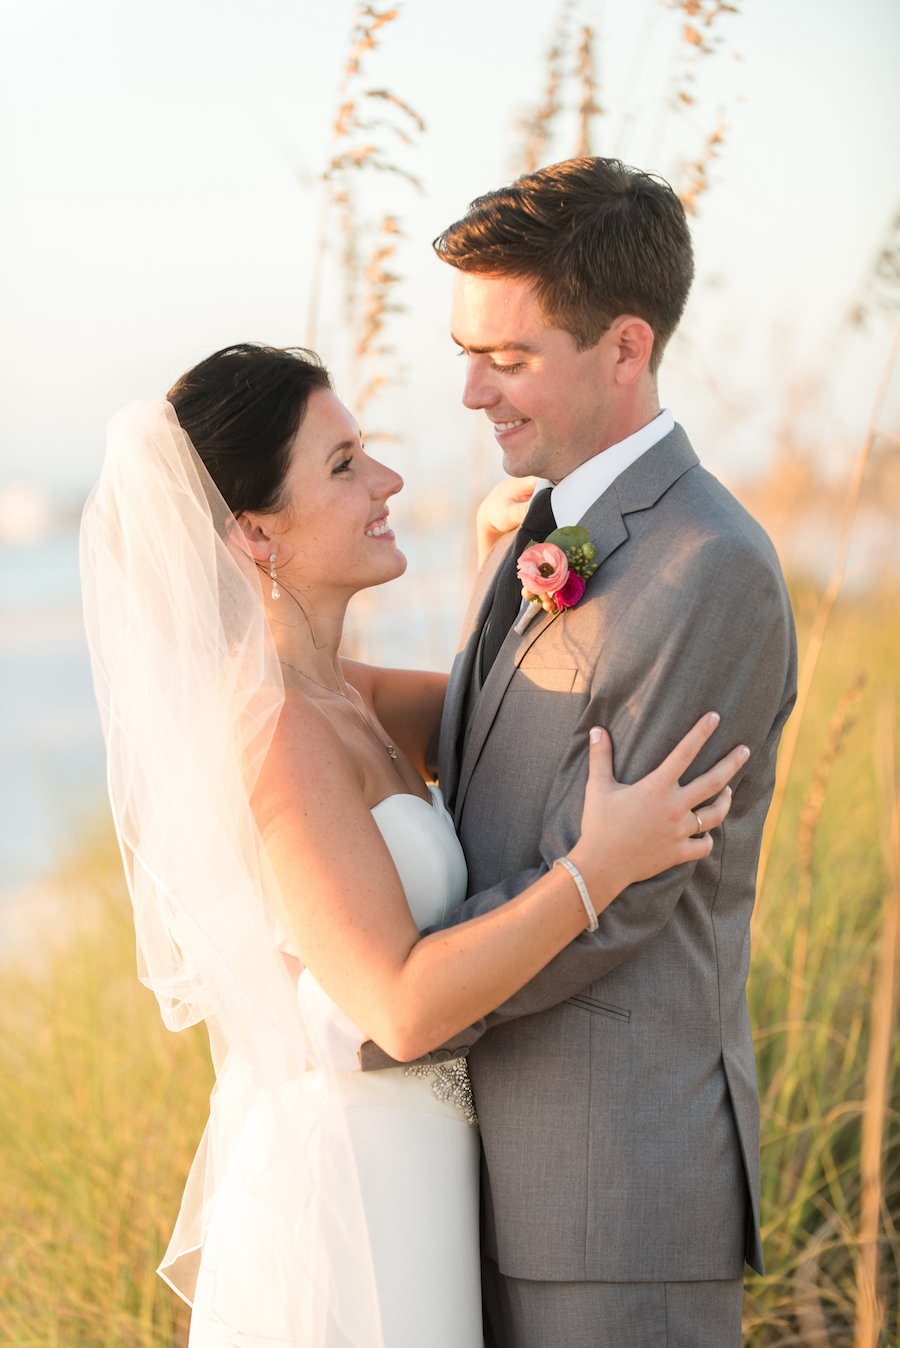 Waterfront, Beach Wedding Portrait of Bride and Groom at St. Pete Wedding